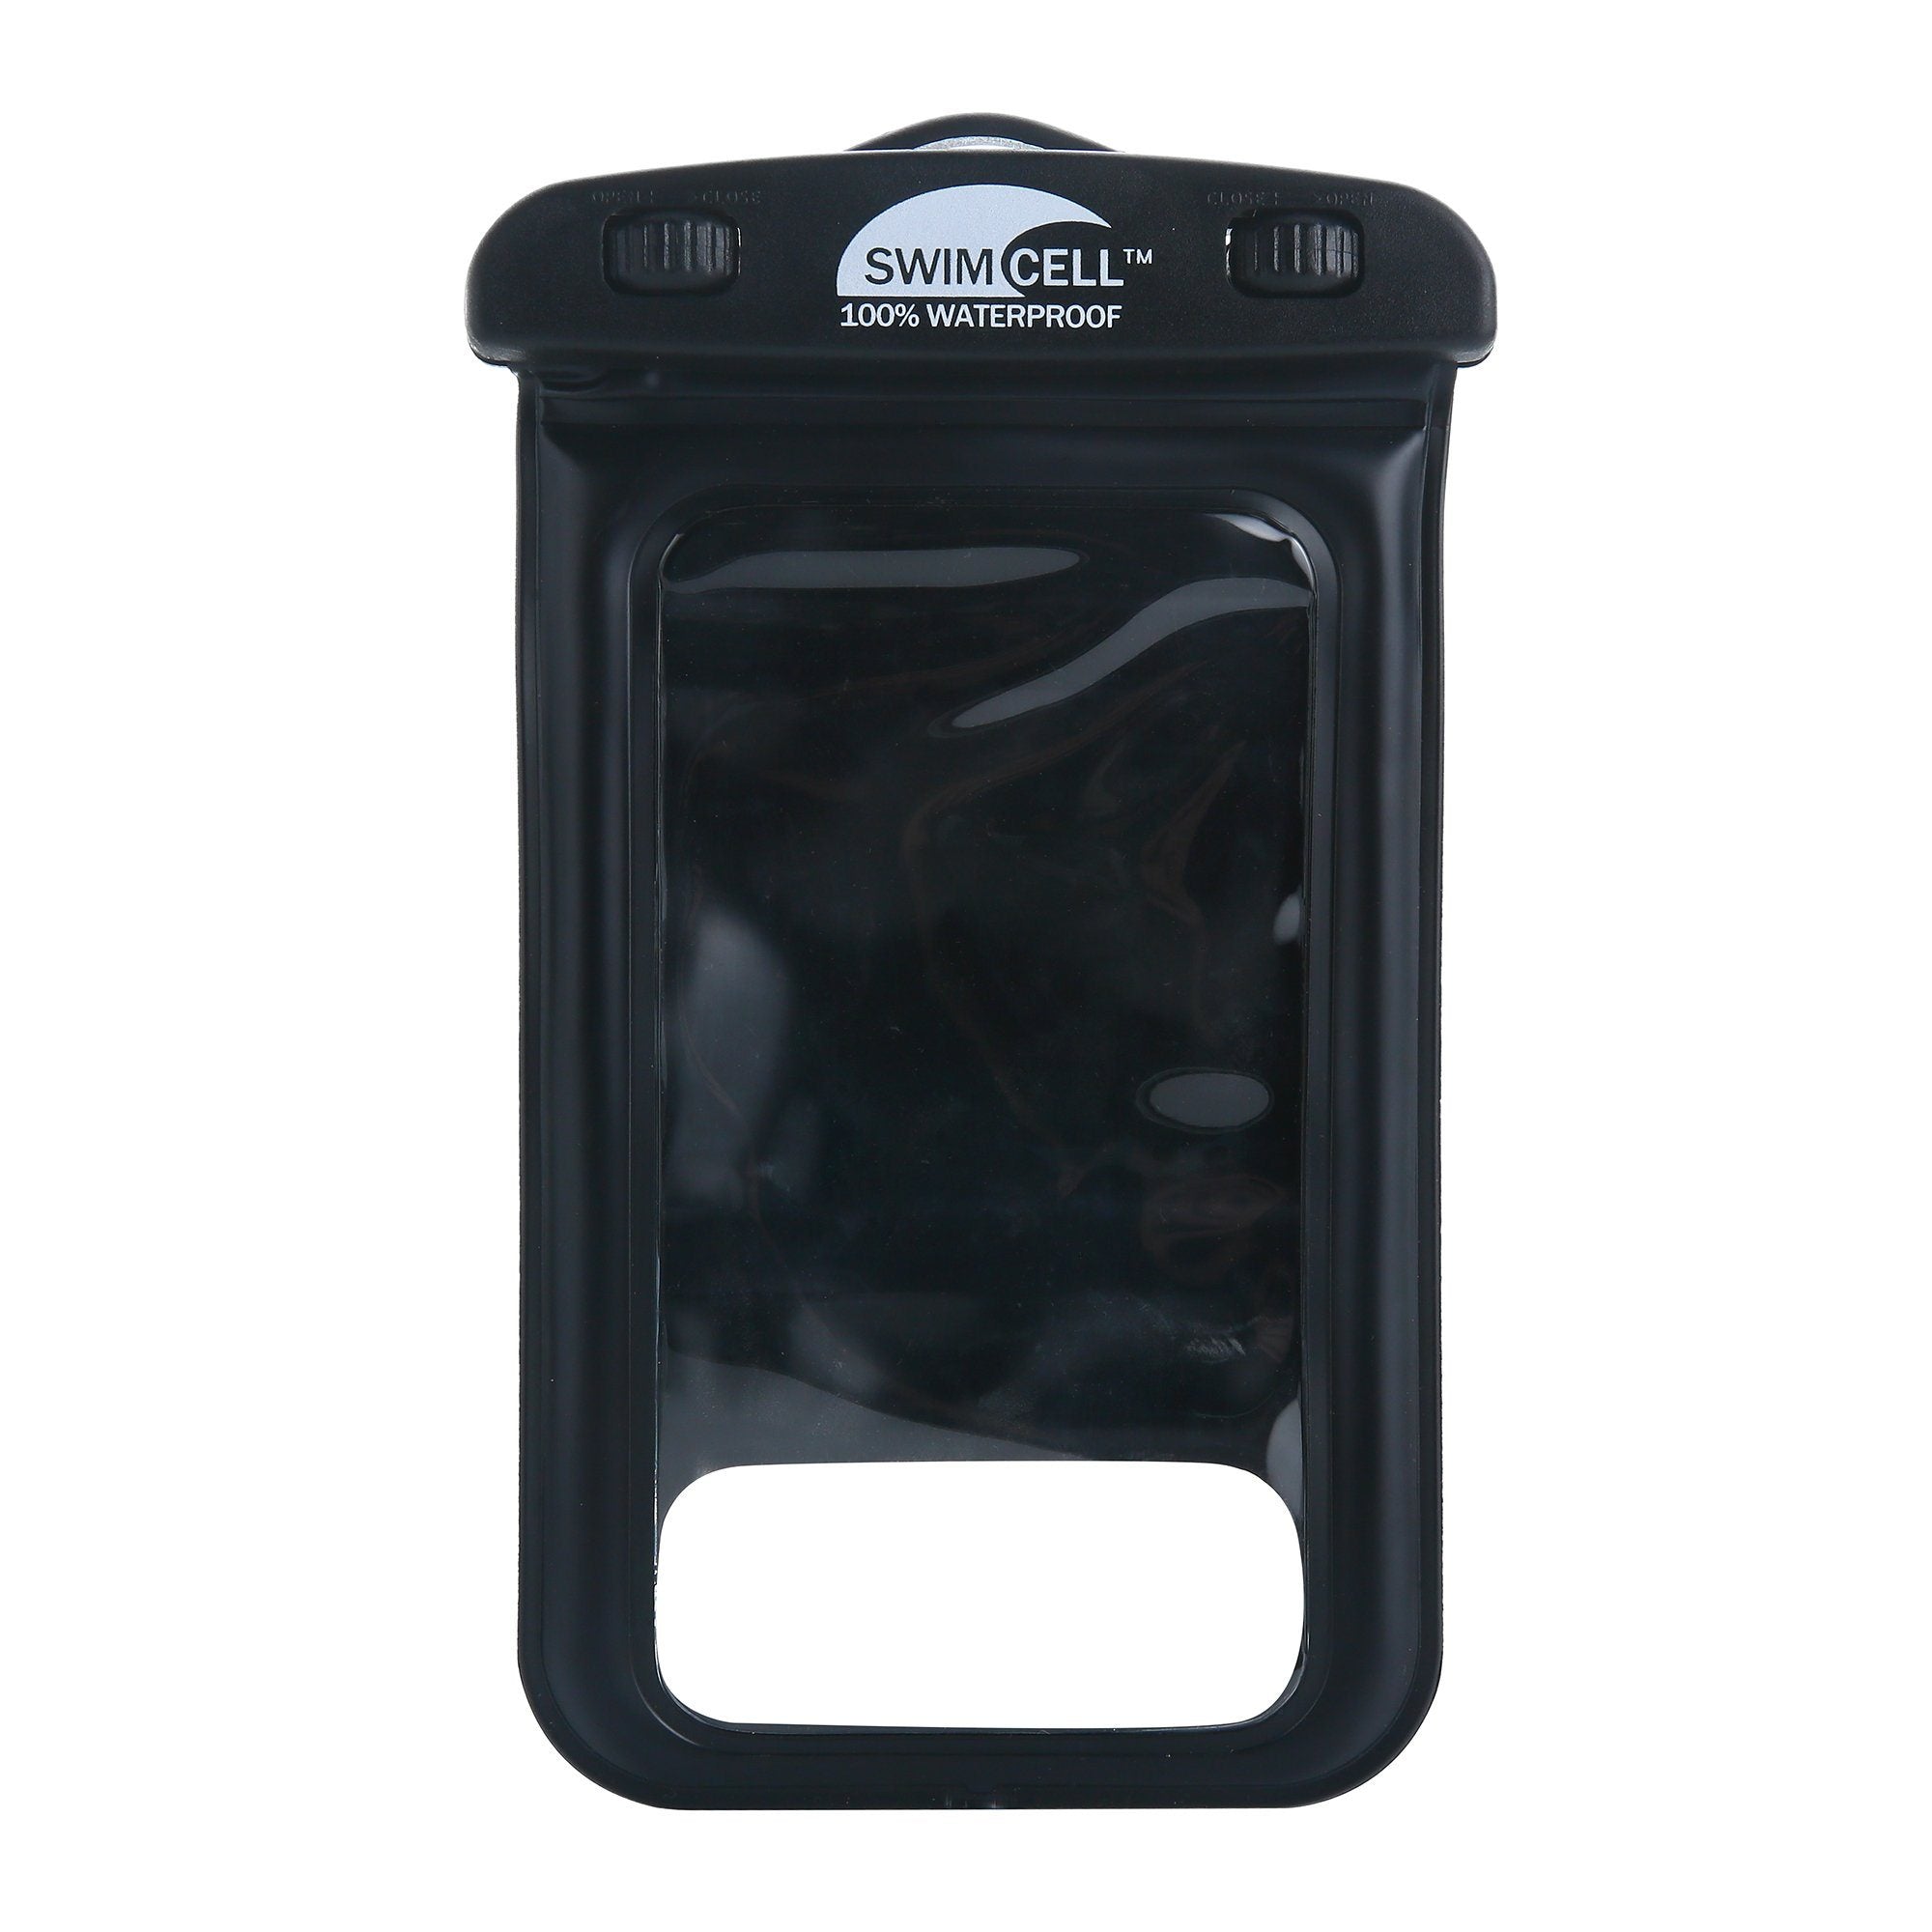 swimcell waterproof phone case armband